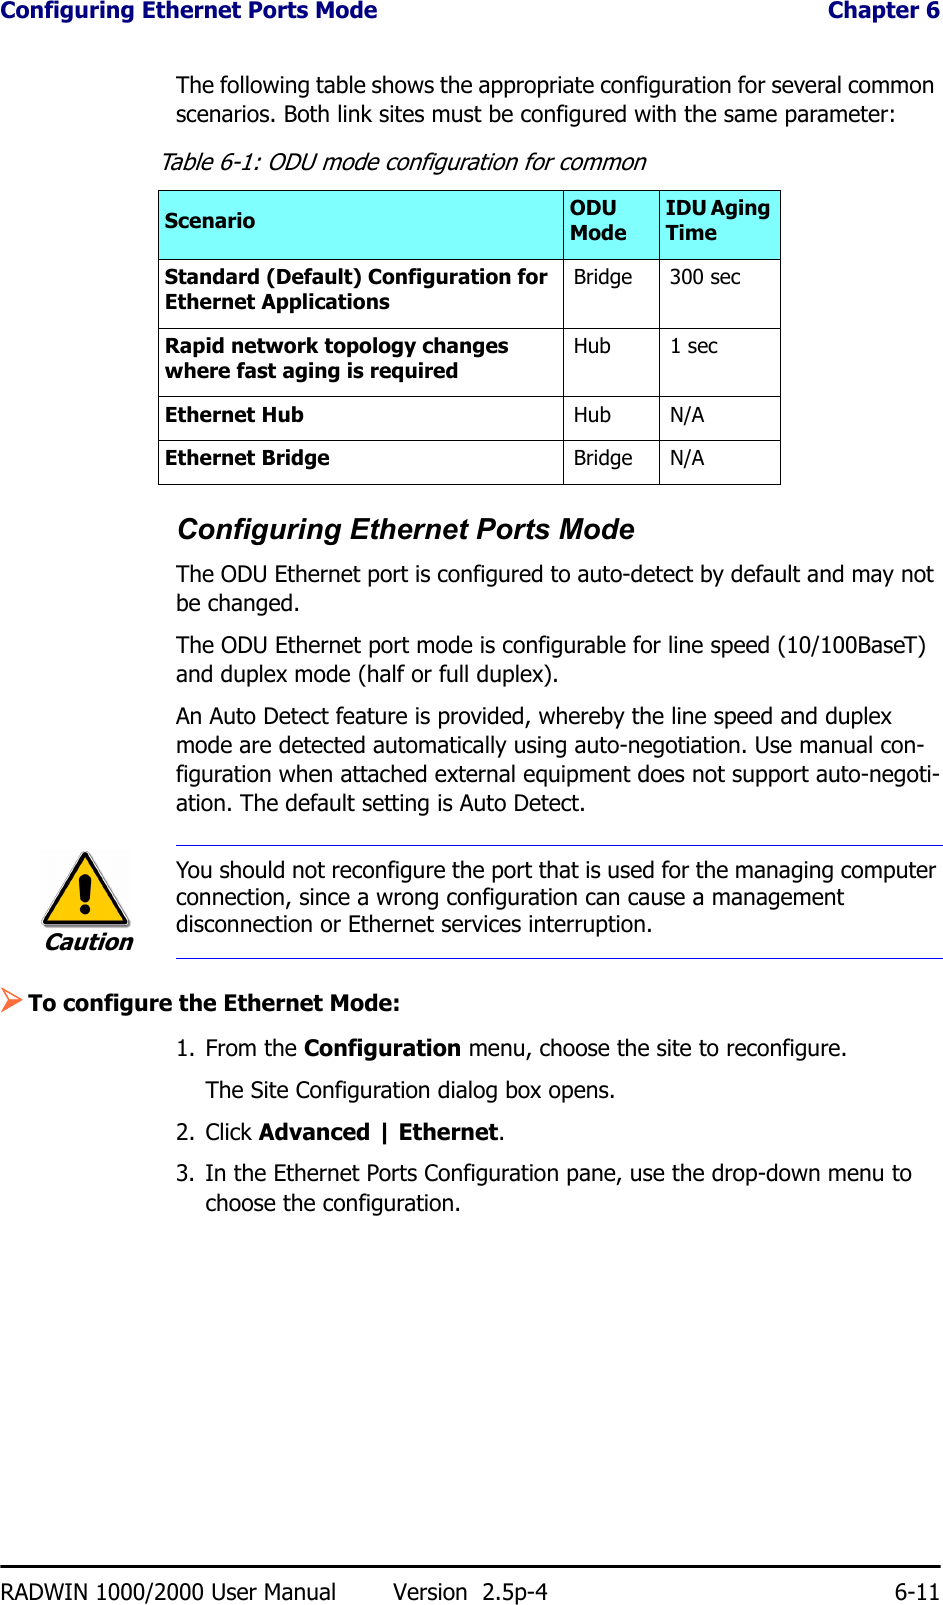 Configuring Ethernet Ports Mode  Chapter 6RADWIN 1000/2000 User Manual Version  2.5p-4 6-11The following table shows the appropriate configuration for several common scenarios. Both link sites must be configured with the same parameter:Configuring Ethernet Ports ModeThe ODU Ethernet port is configured to auto-detect by default and may not be changed.The ODU Ethernet port mode is configurable for line speed (10/100BaseT) and duplex mode (half or full duplex).An Auto Detect feature is provided, whereby the line speed and duplex mode are detected automatically using auto-negotiation. Use manual con-figuration when attached external equipment does not support auto-negoti-ation. The default setting is Auto Detect.¾To configure the Ethernet Mode:1. From the Configuration menu, choose the site to reconfigure.The Site Configuration dialog box opens.2. Click Advanced | Ethernet.3. In the Ethernet Ports Configuration pane, use the drop-down menu to choose the configuration.Table 6-1: ODU mode configuration for commonScenario ODU ModeIDU Aging TimeStandard (Default) Configuration for Ethernet ApplicationsBridge 300 secRapid network topology changes where fast aging is requiredHub 1 secEthernet Hub Hub N/AEthernet Bridge Bridge N/ACautionYou should not reconfigure the port that is used for the managing computer connection, since a wrong configuration can cause a management disconnection or Ethernet services interruption.